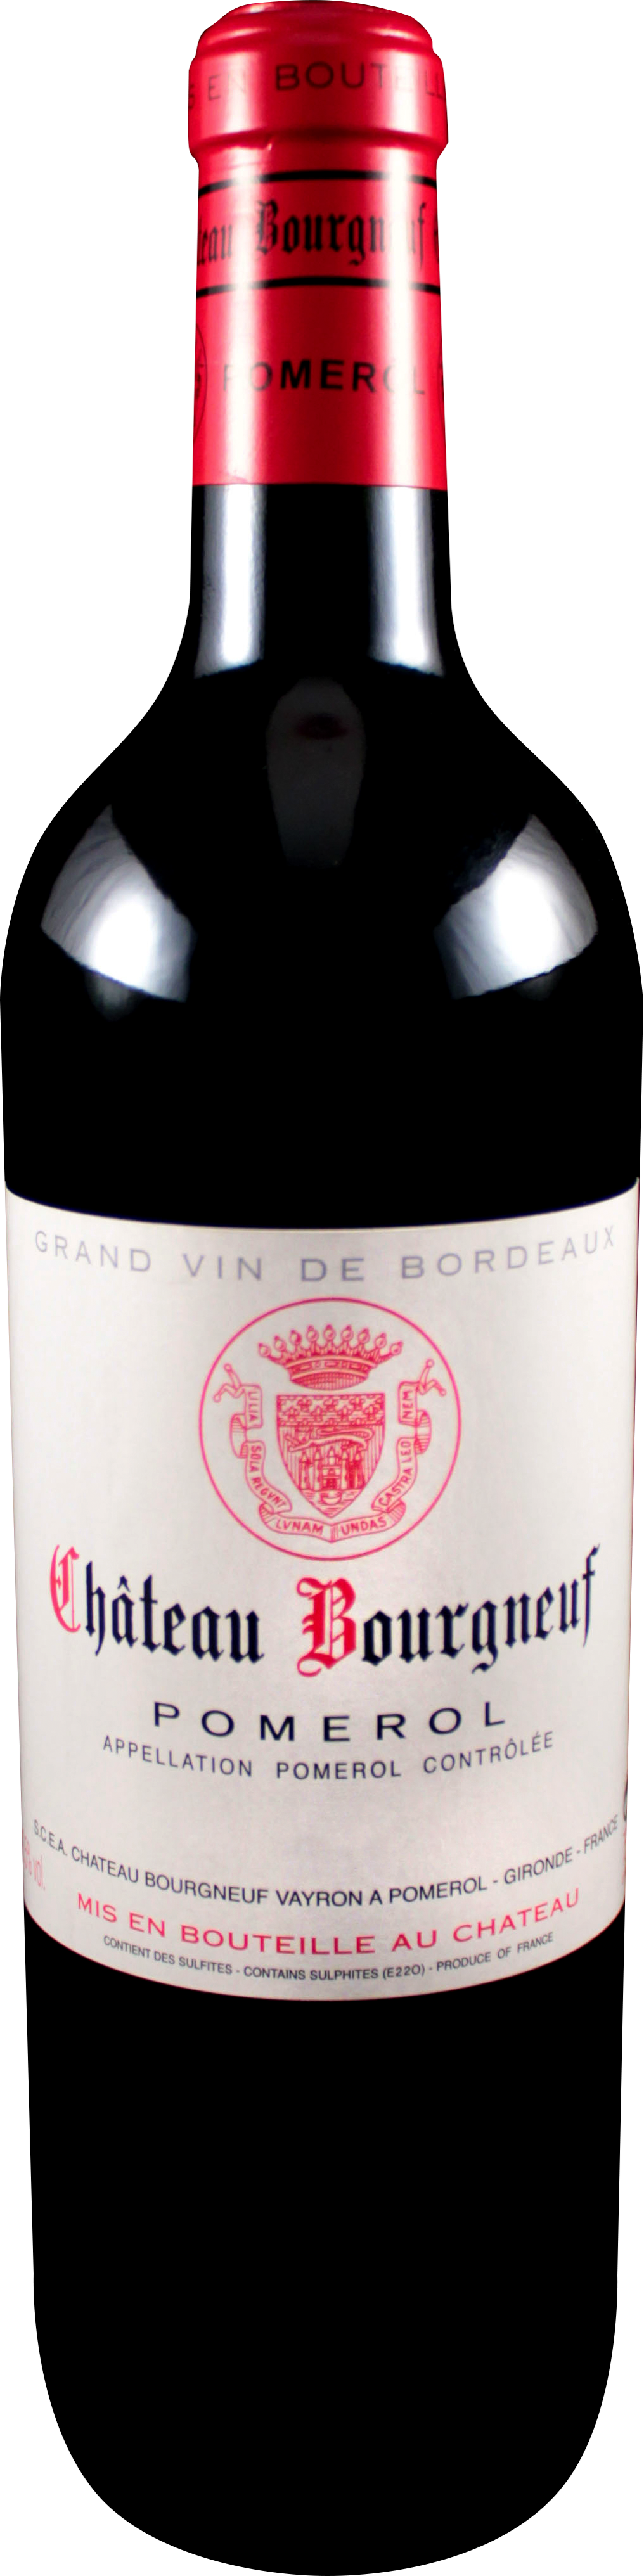 Bottle shot of 2010 Château Bourgneuf, Pomerol